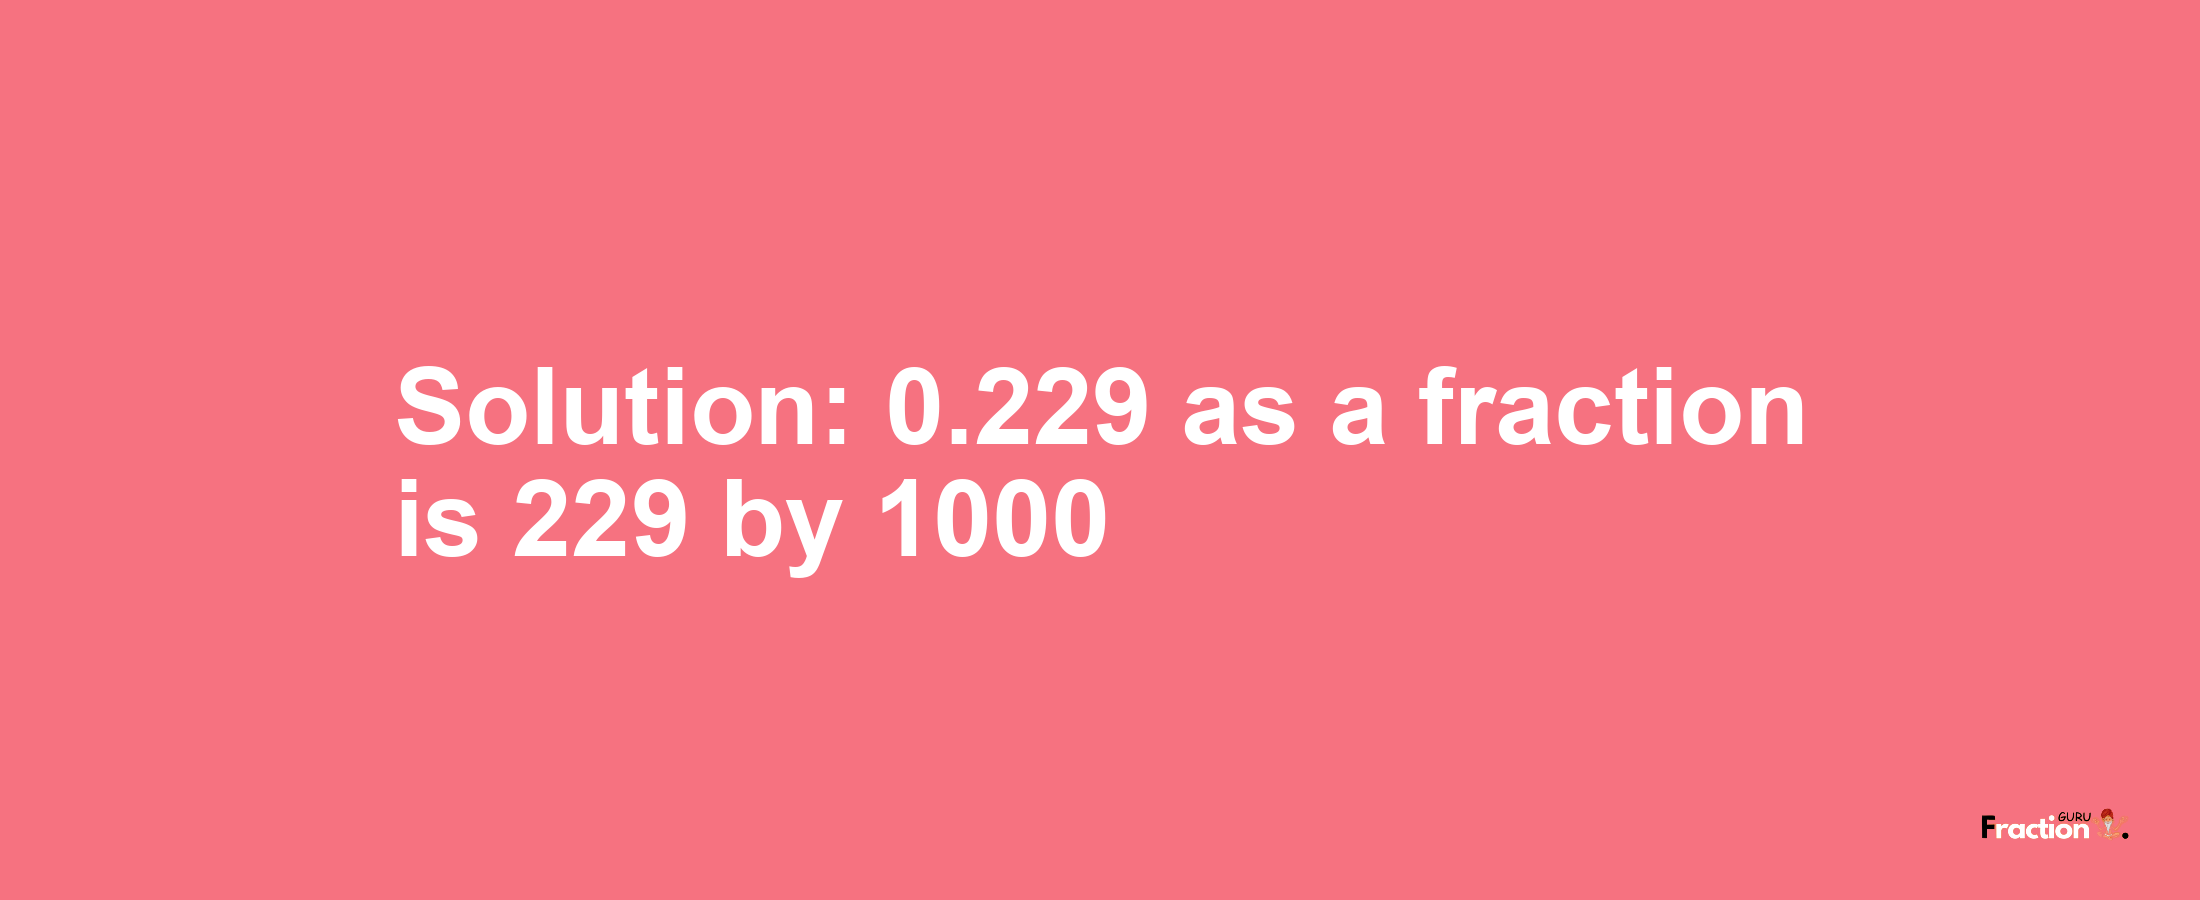 Solution:0.229 as a fraction is 229/1000